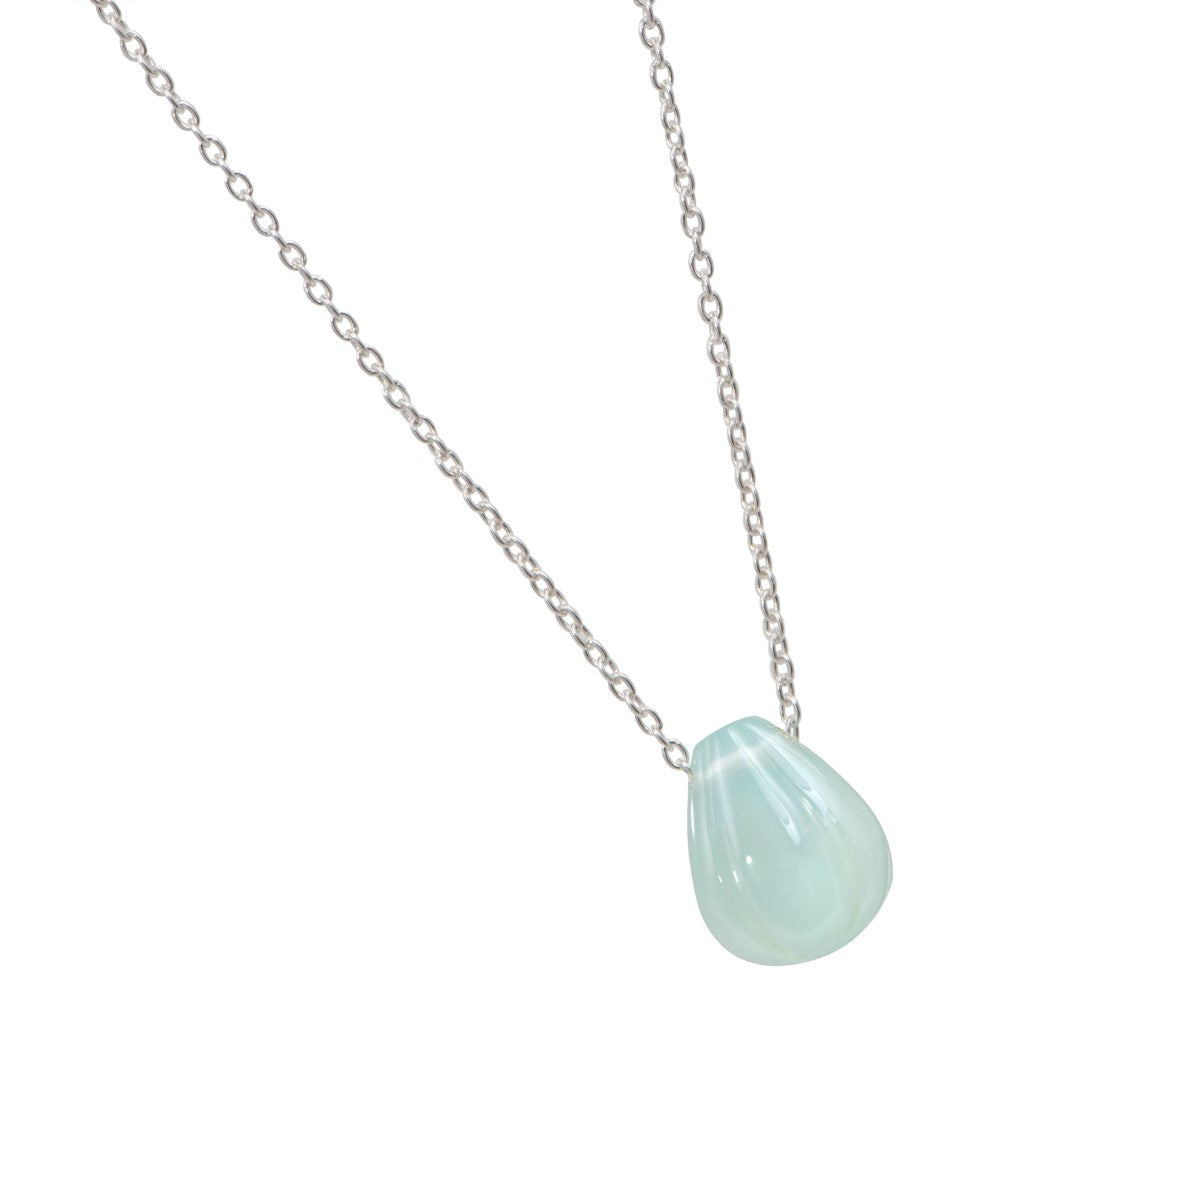 Sterling Silver Necklace with a Carved Aqua Chalcedony Gemstone